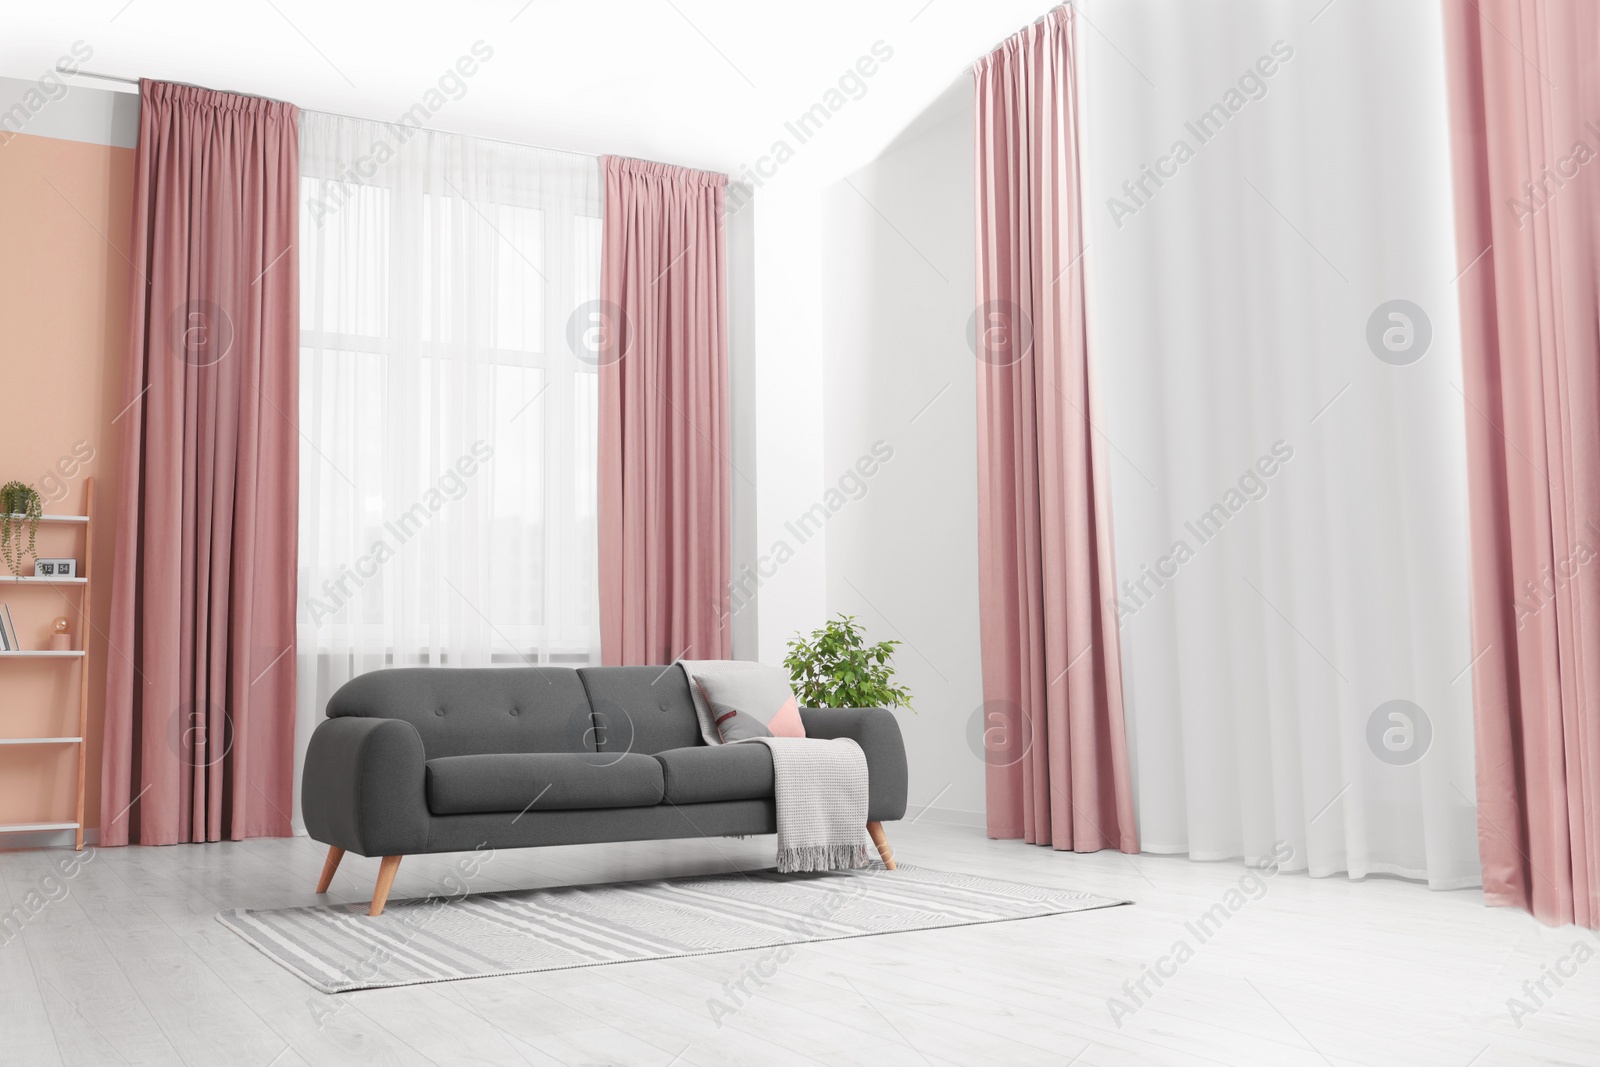 Photo of Stylish living room interior with cozy sofa, houseplant and elegant curtains